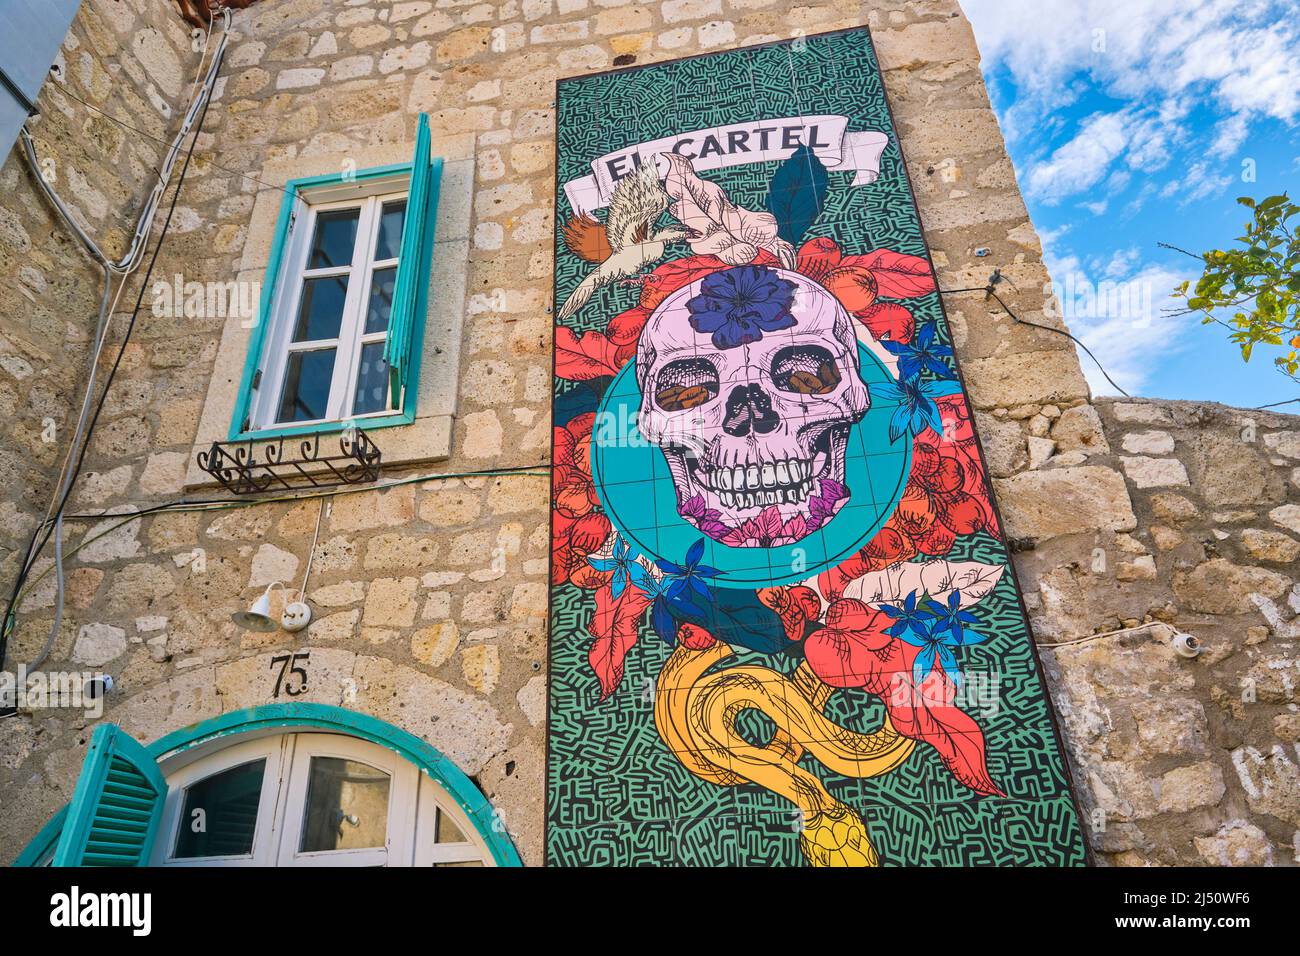 A cool, colorful, Mexican, Spanish skull mural for a cafe. In the town of Alaçatı, Izmir Province, Turkey. Stock Photo